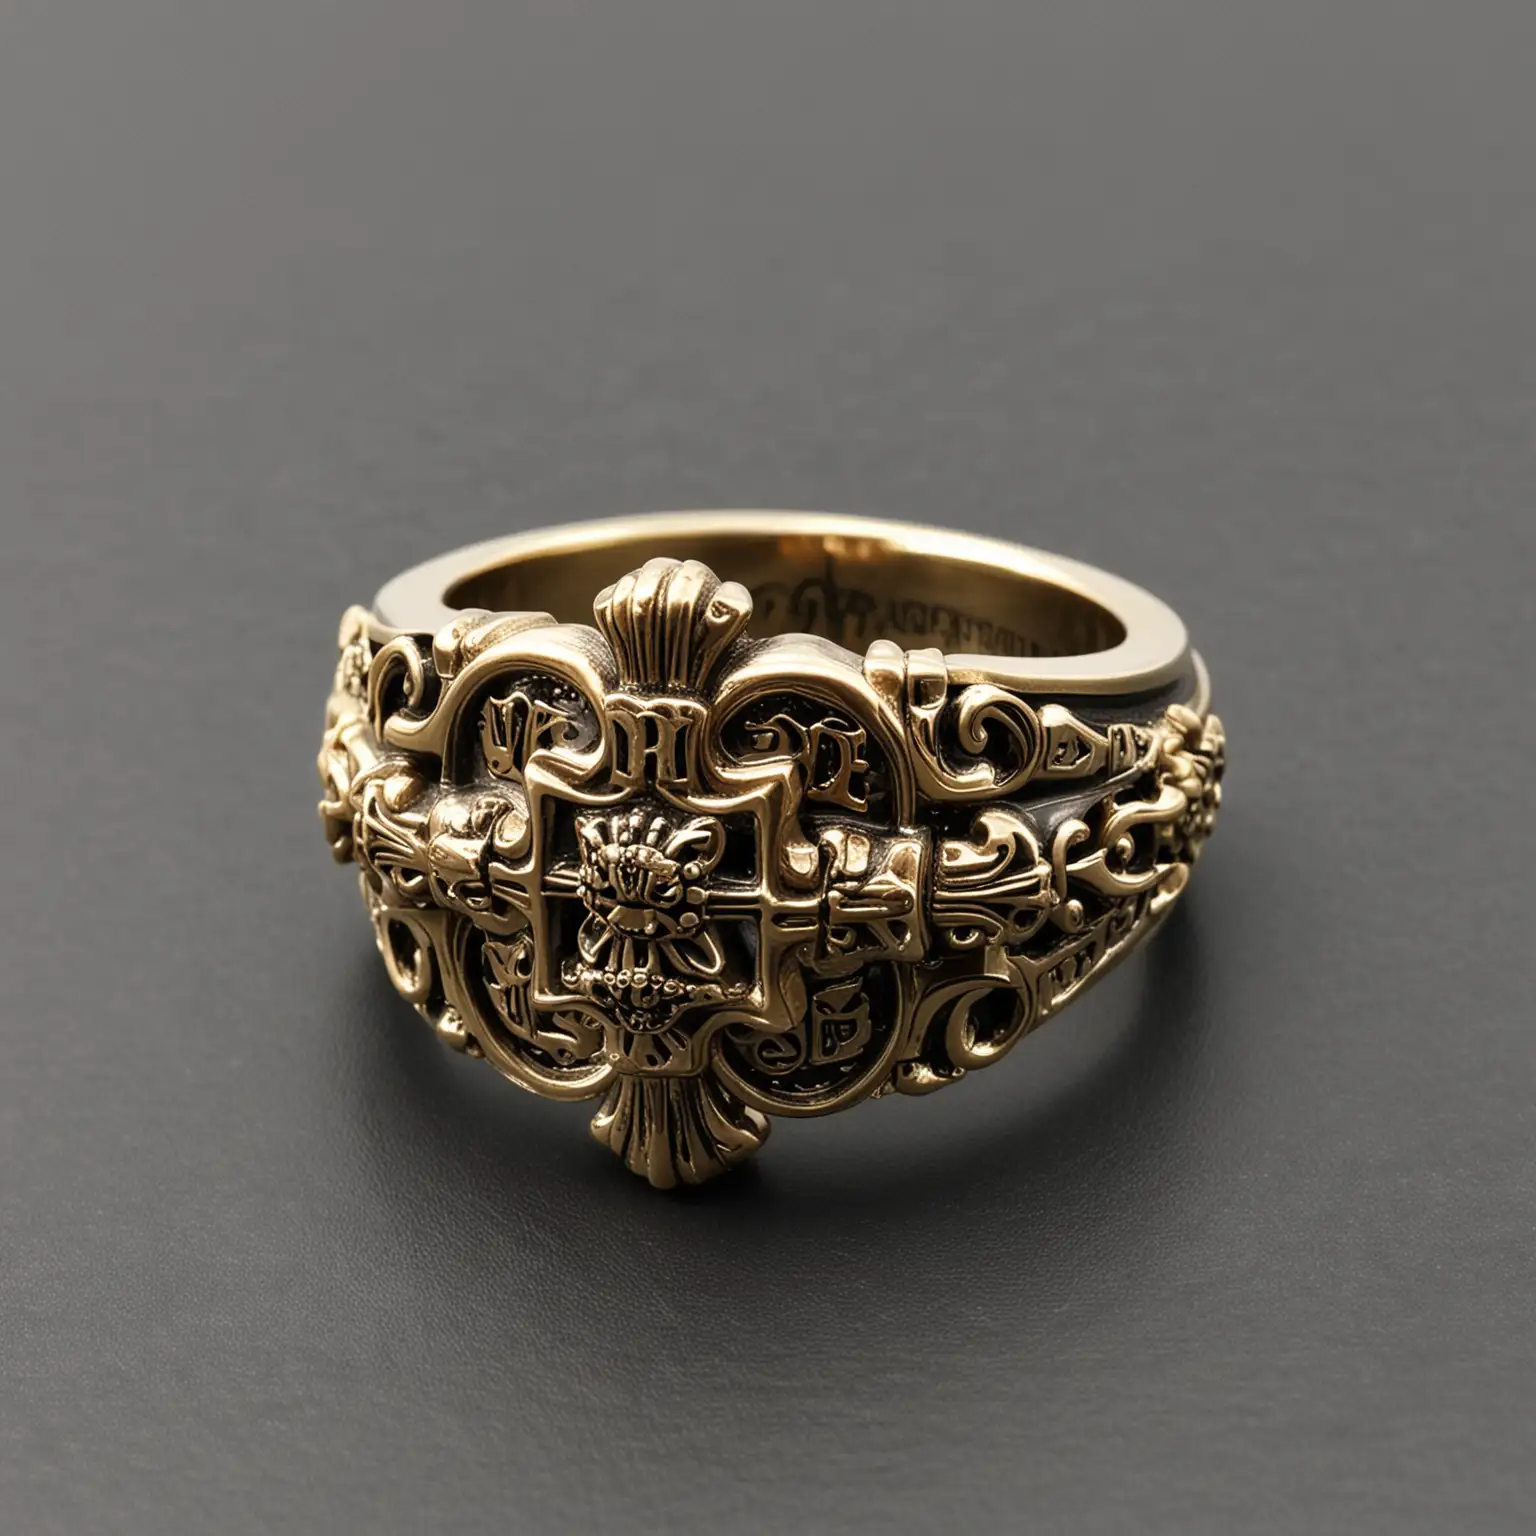 design a Chrome Hearts styled ring antique Gold inspired by chrome hearts